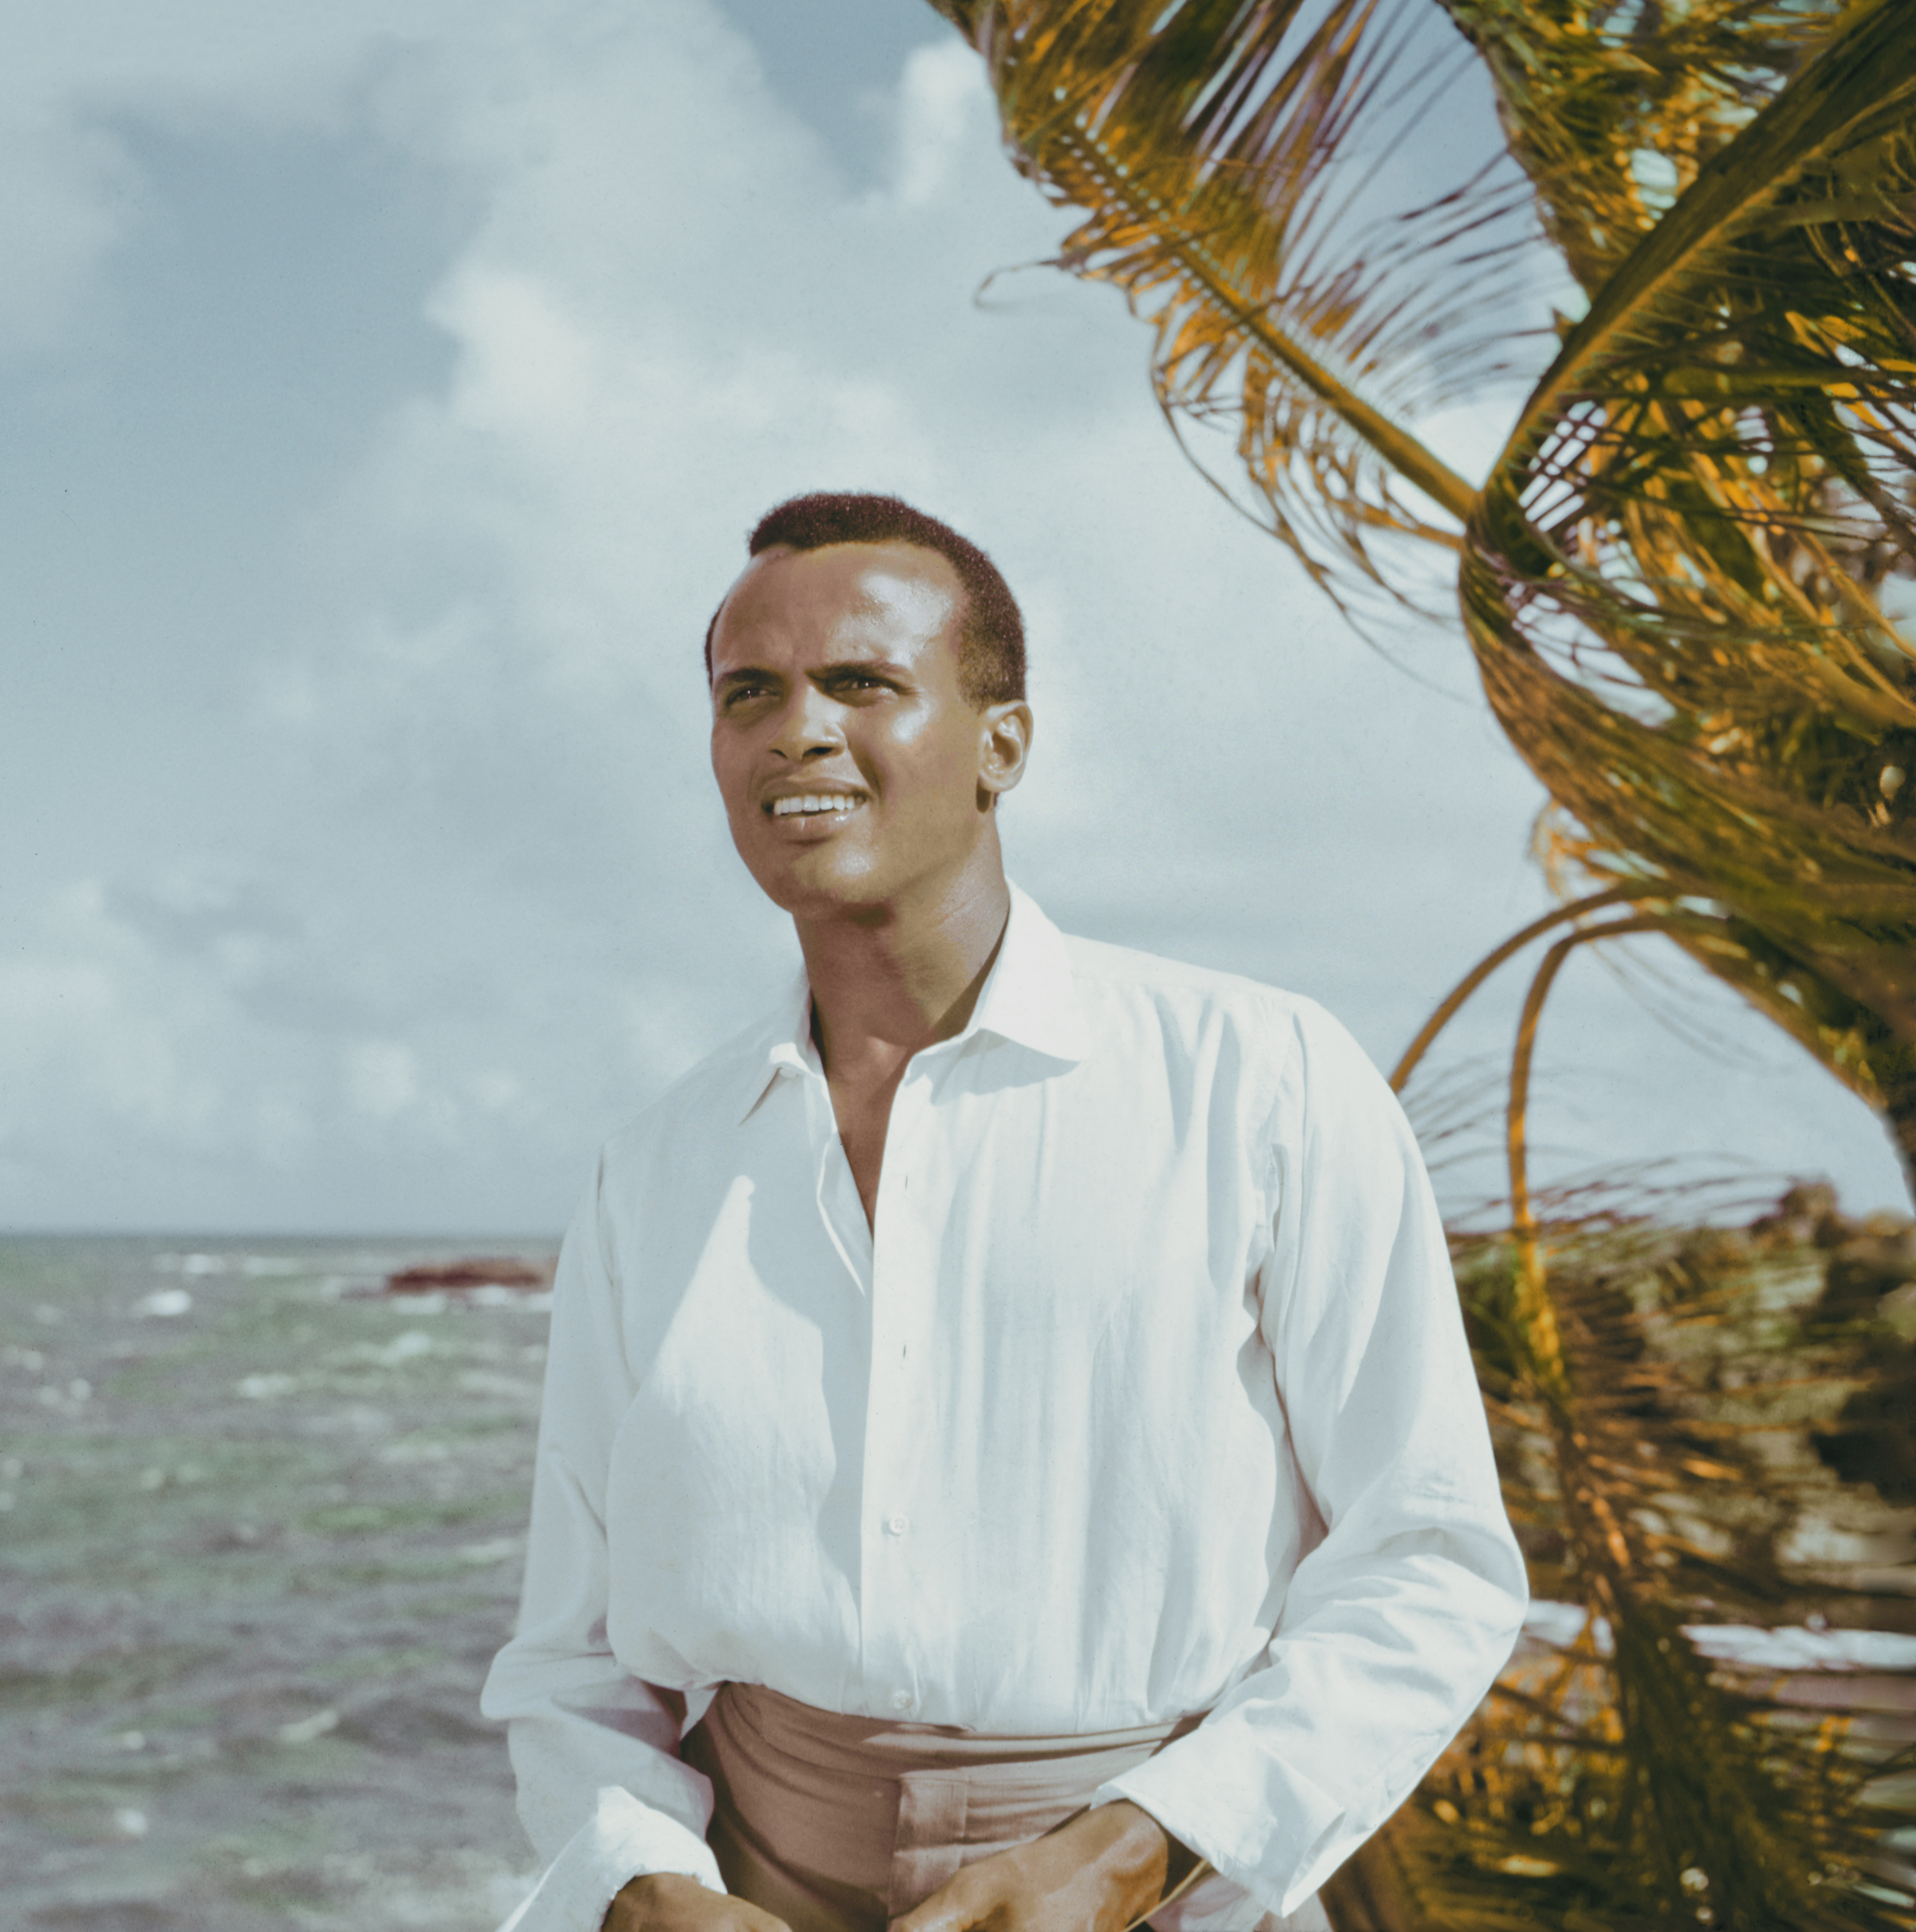 American actor and singer Harry Belafonte on a beach, circa 1957. | Source: Getty Images